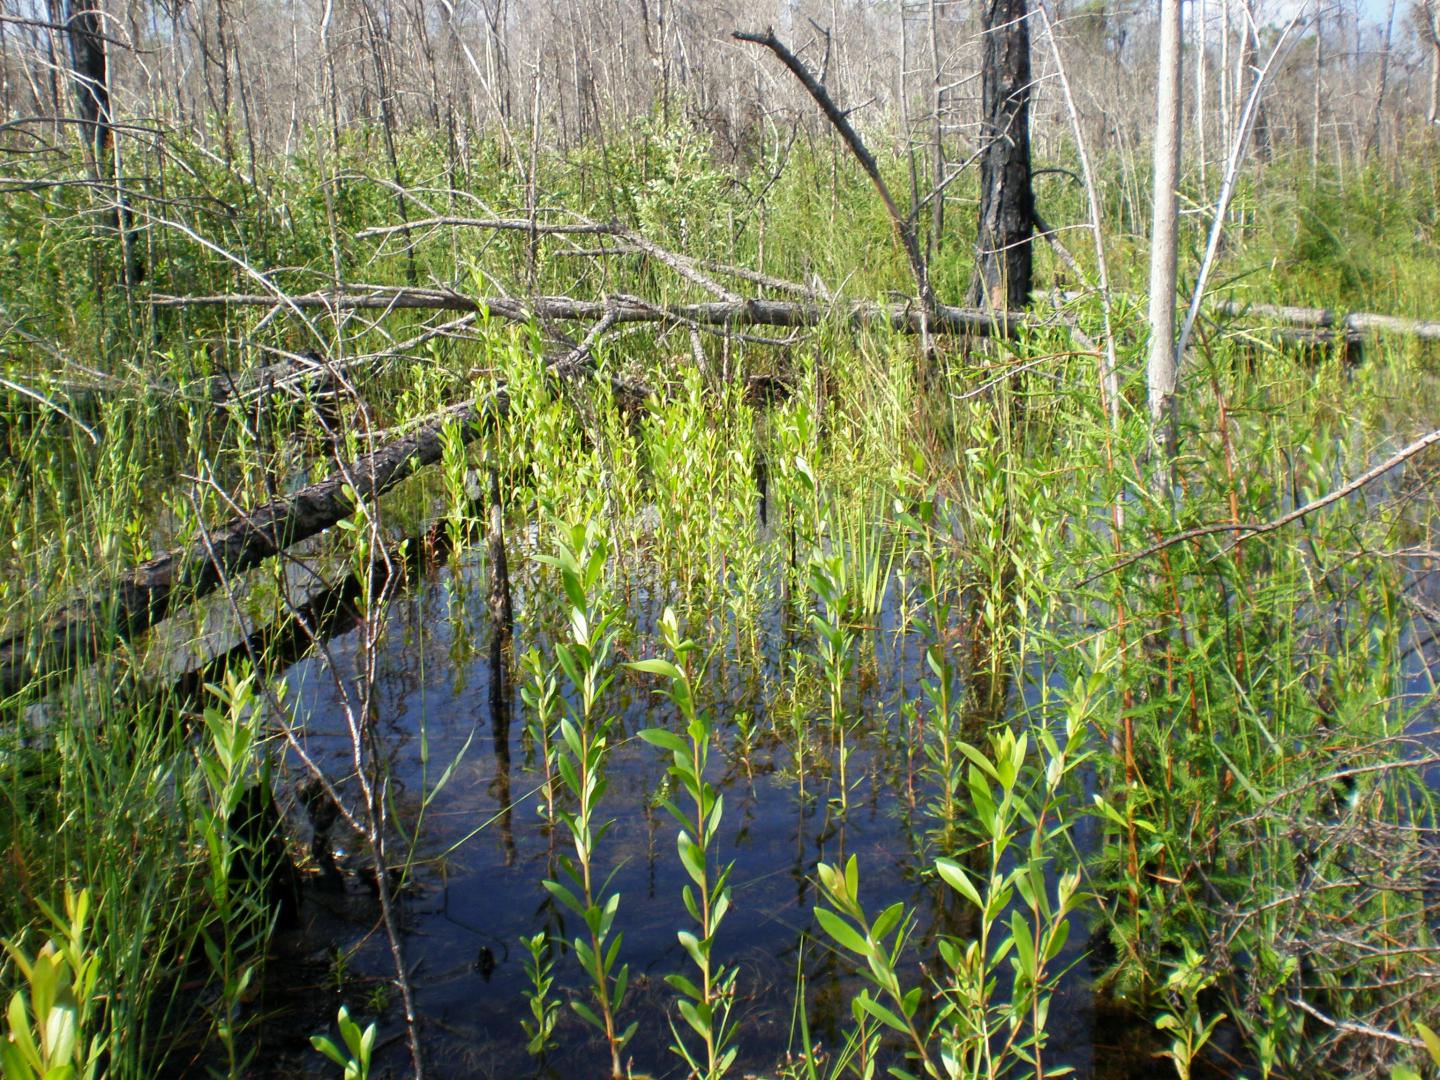 Melaleuca quinquenervia seedlings in the western Everglades region of Florida, USA following a fire